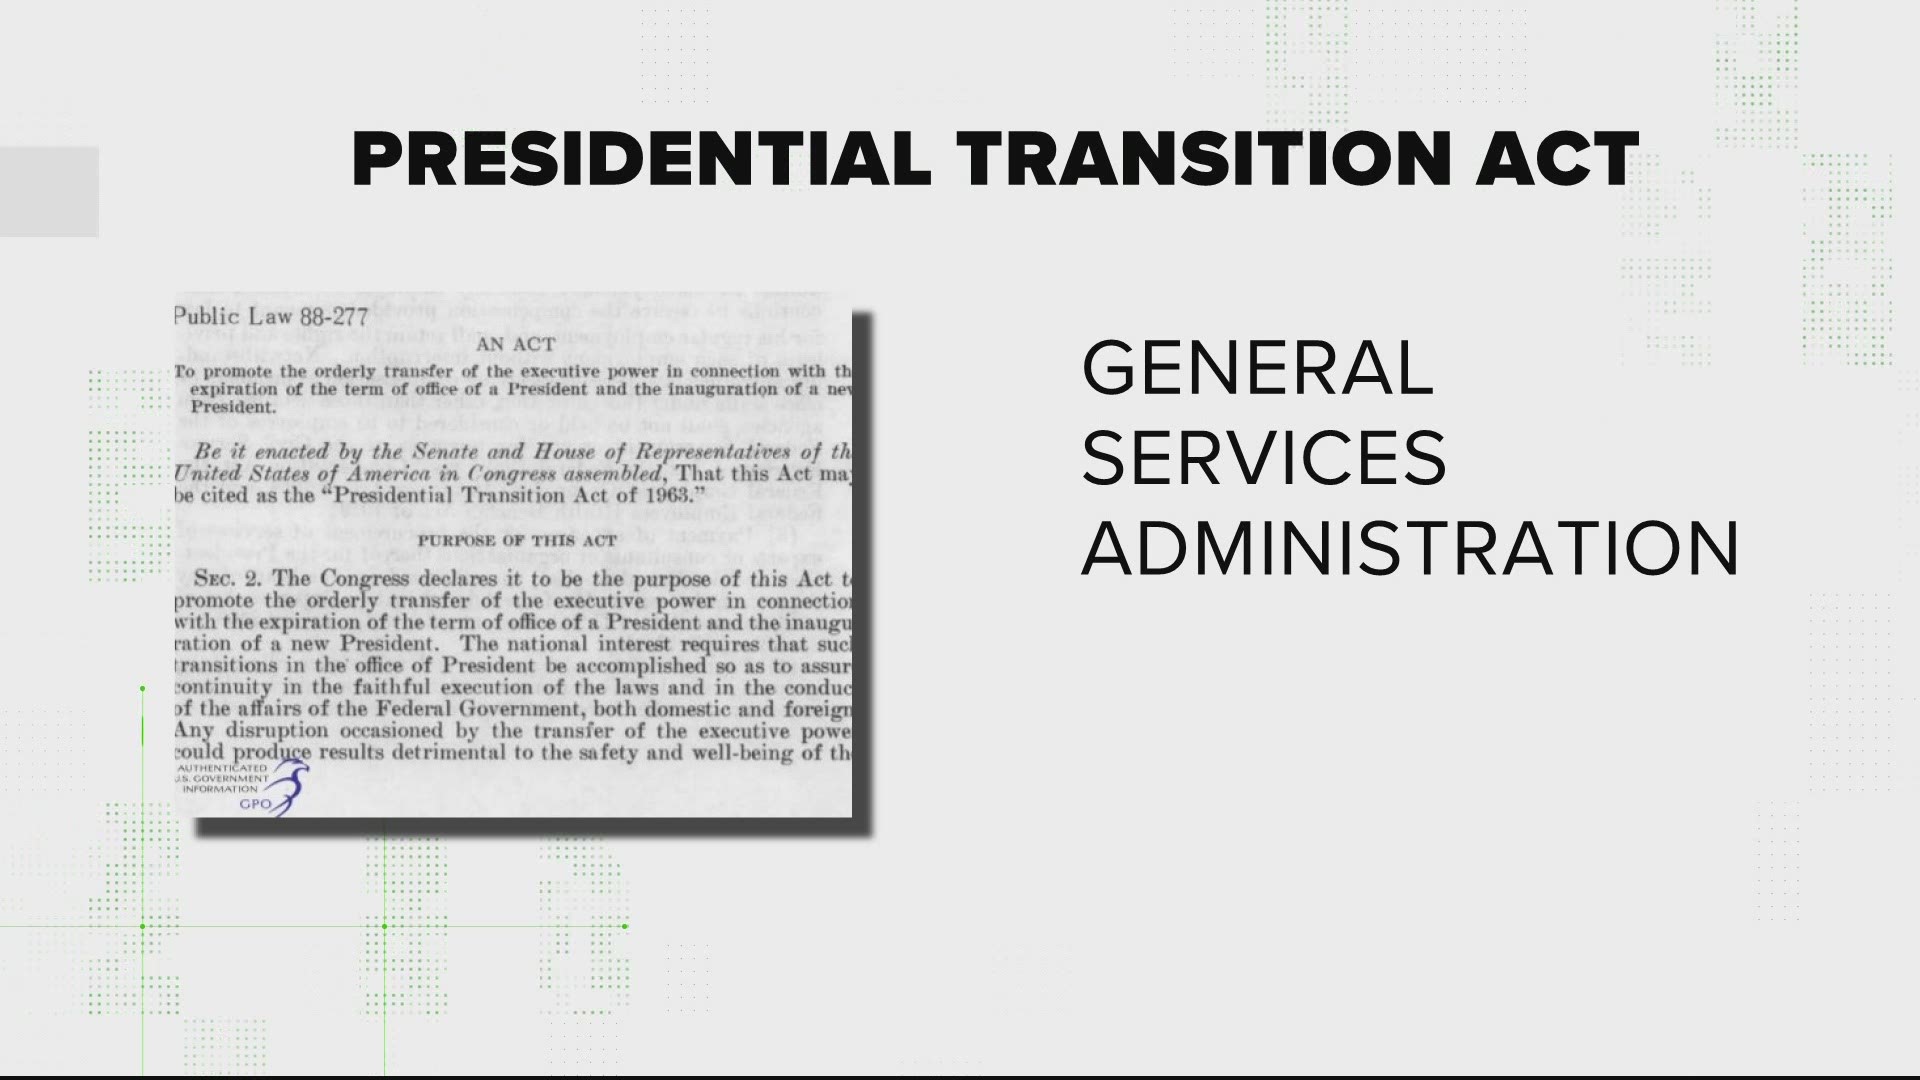 The act is supposed to allow for smooth transitions of presidencies. However, its lack of specifics is causing issues in 2020.